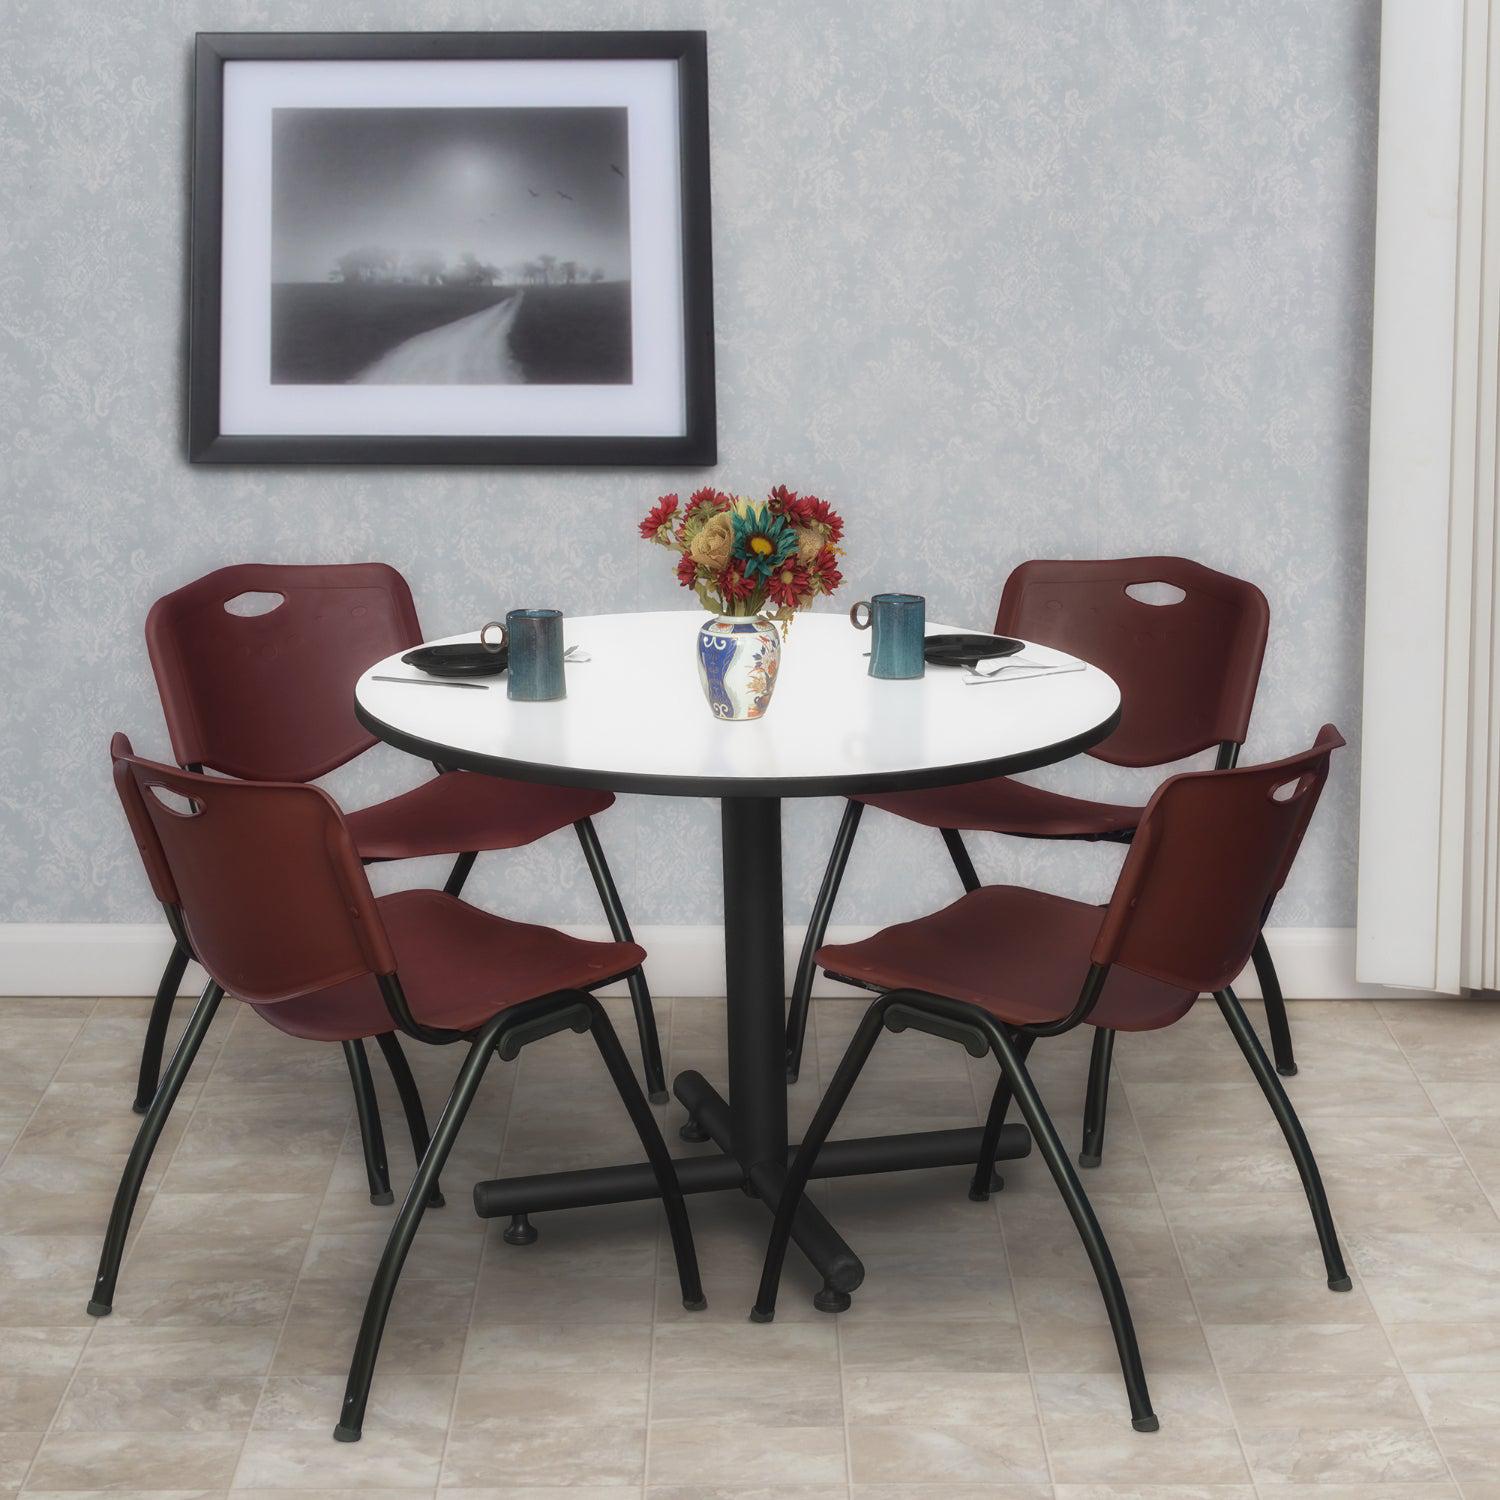 Kobe Round Breakroom Table and Chair Package, Kobe 42" Round X-Base Breakroom Table with 4 "M" Stack Chairs